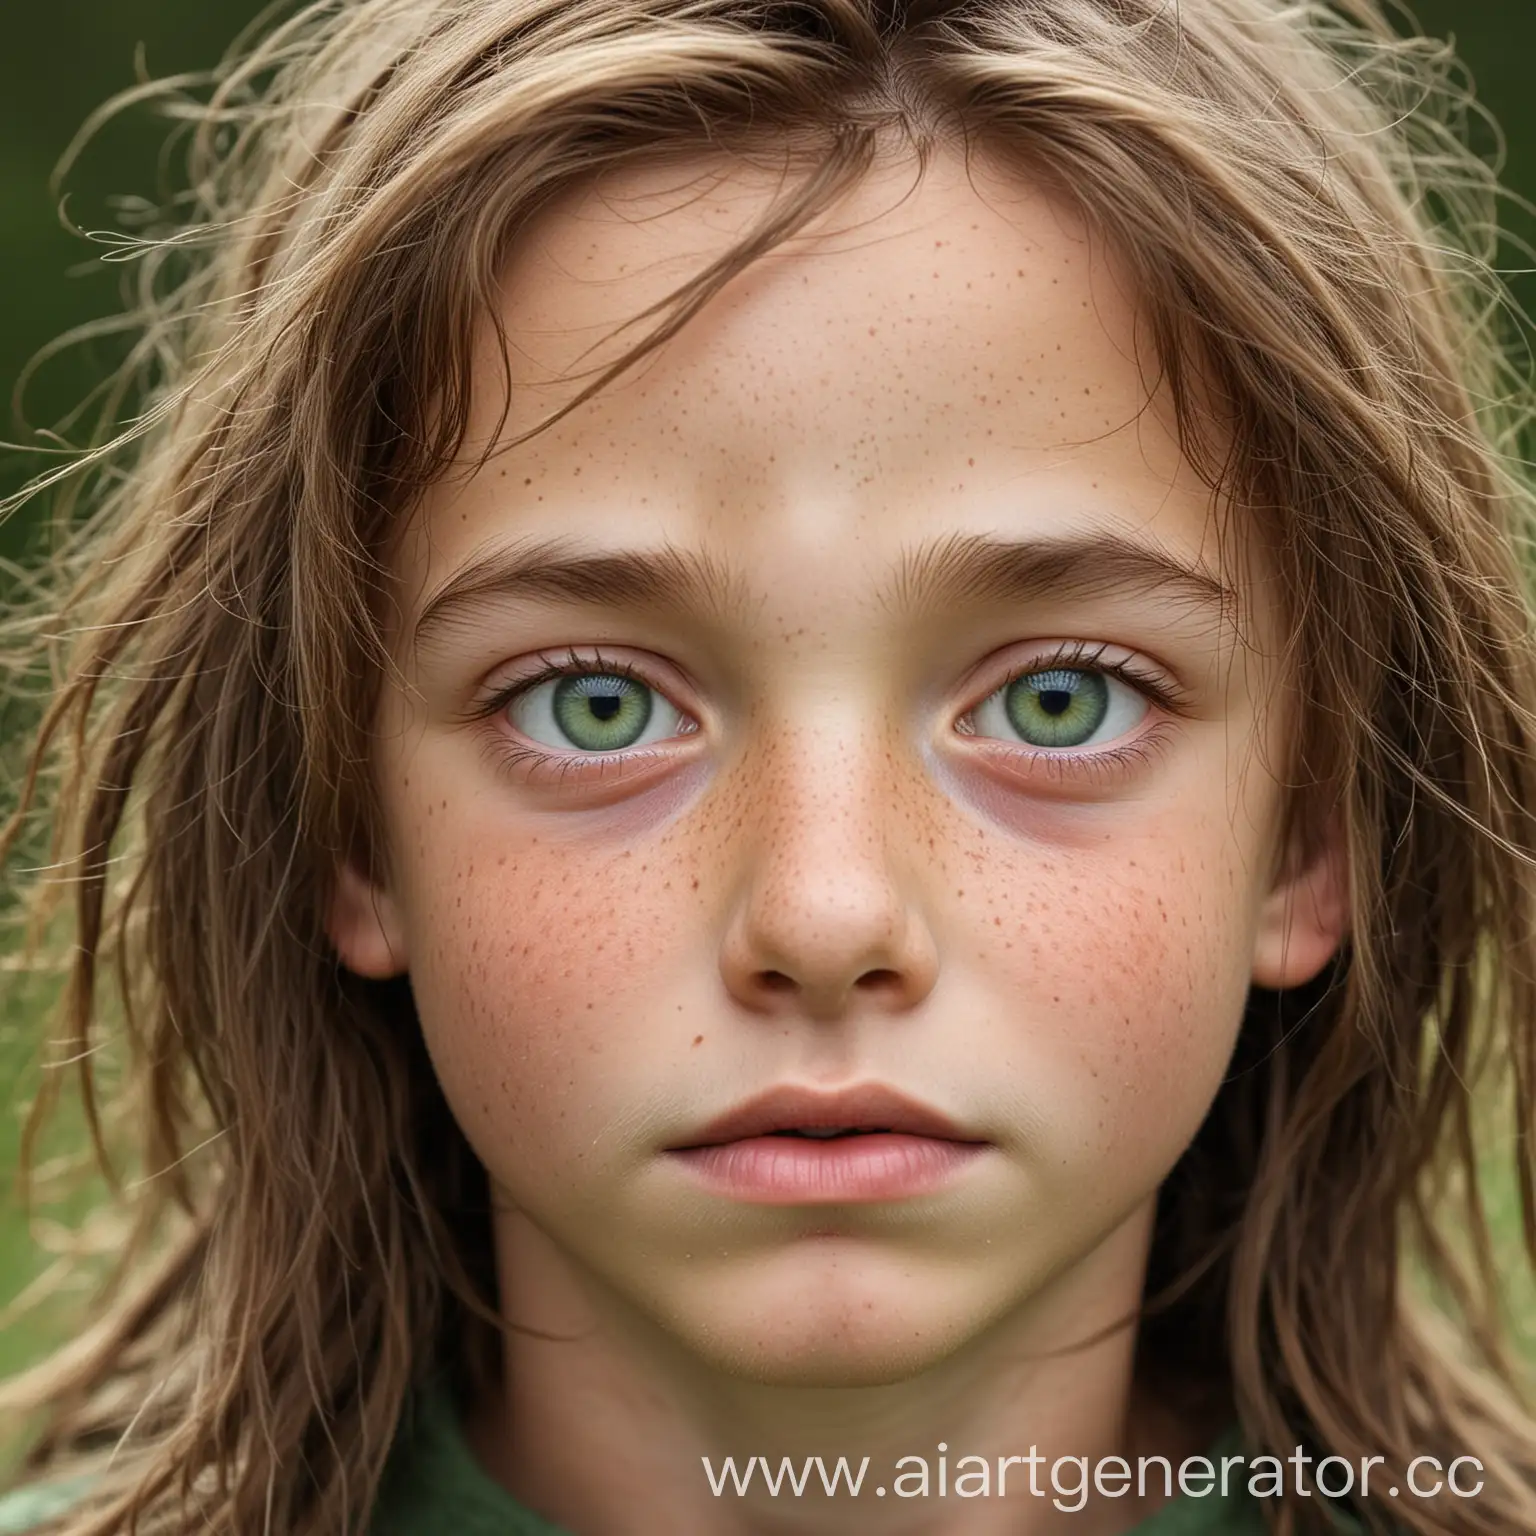 Adorable-NineYearOld-European-Boy-with-Long-Hair-and-Freckles